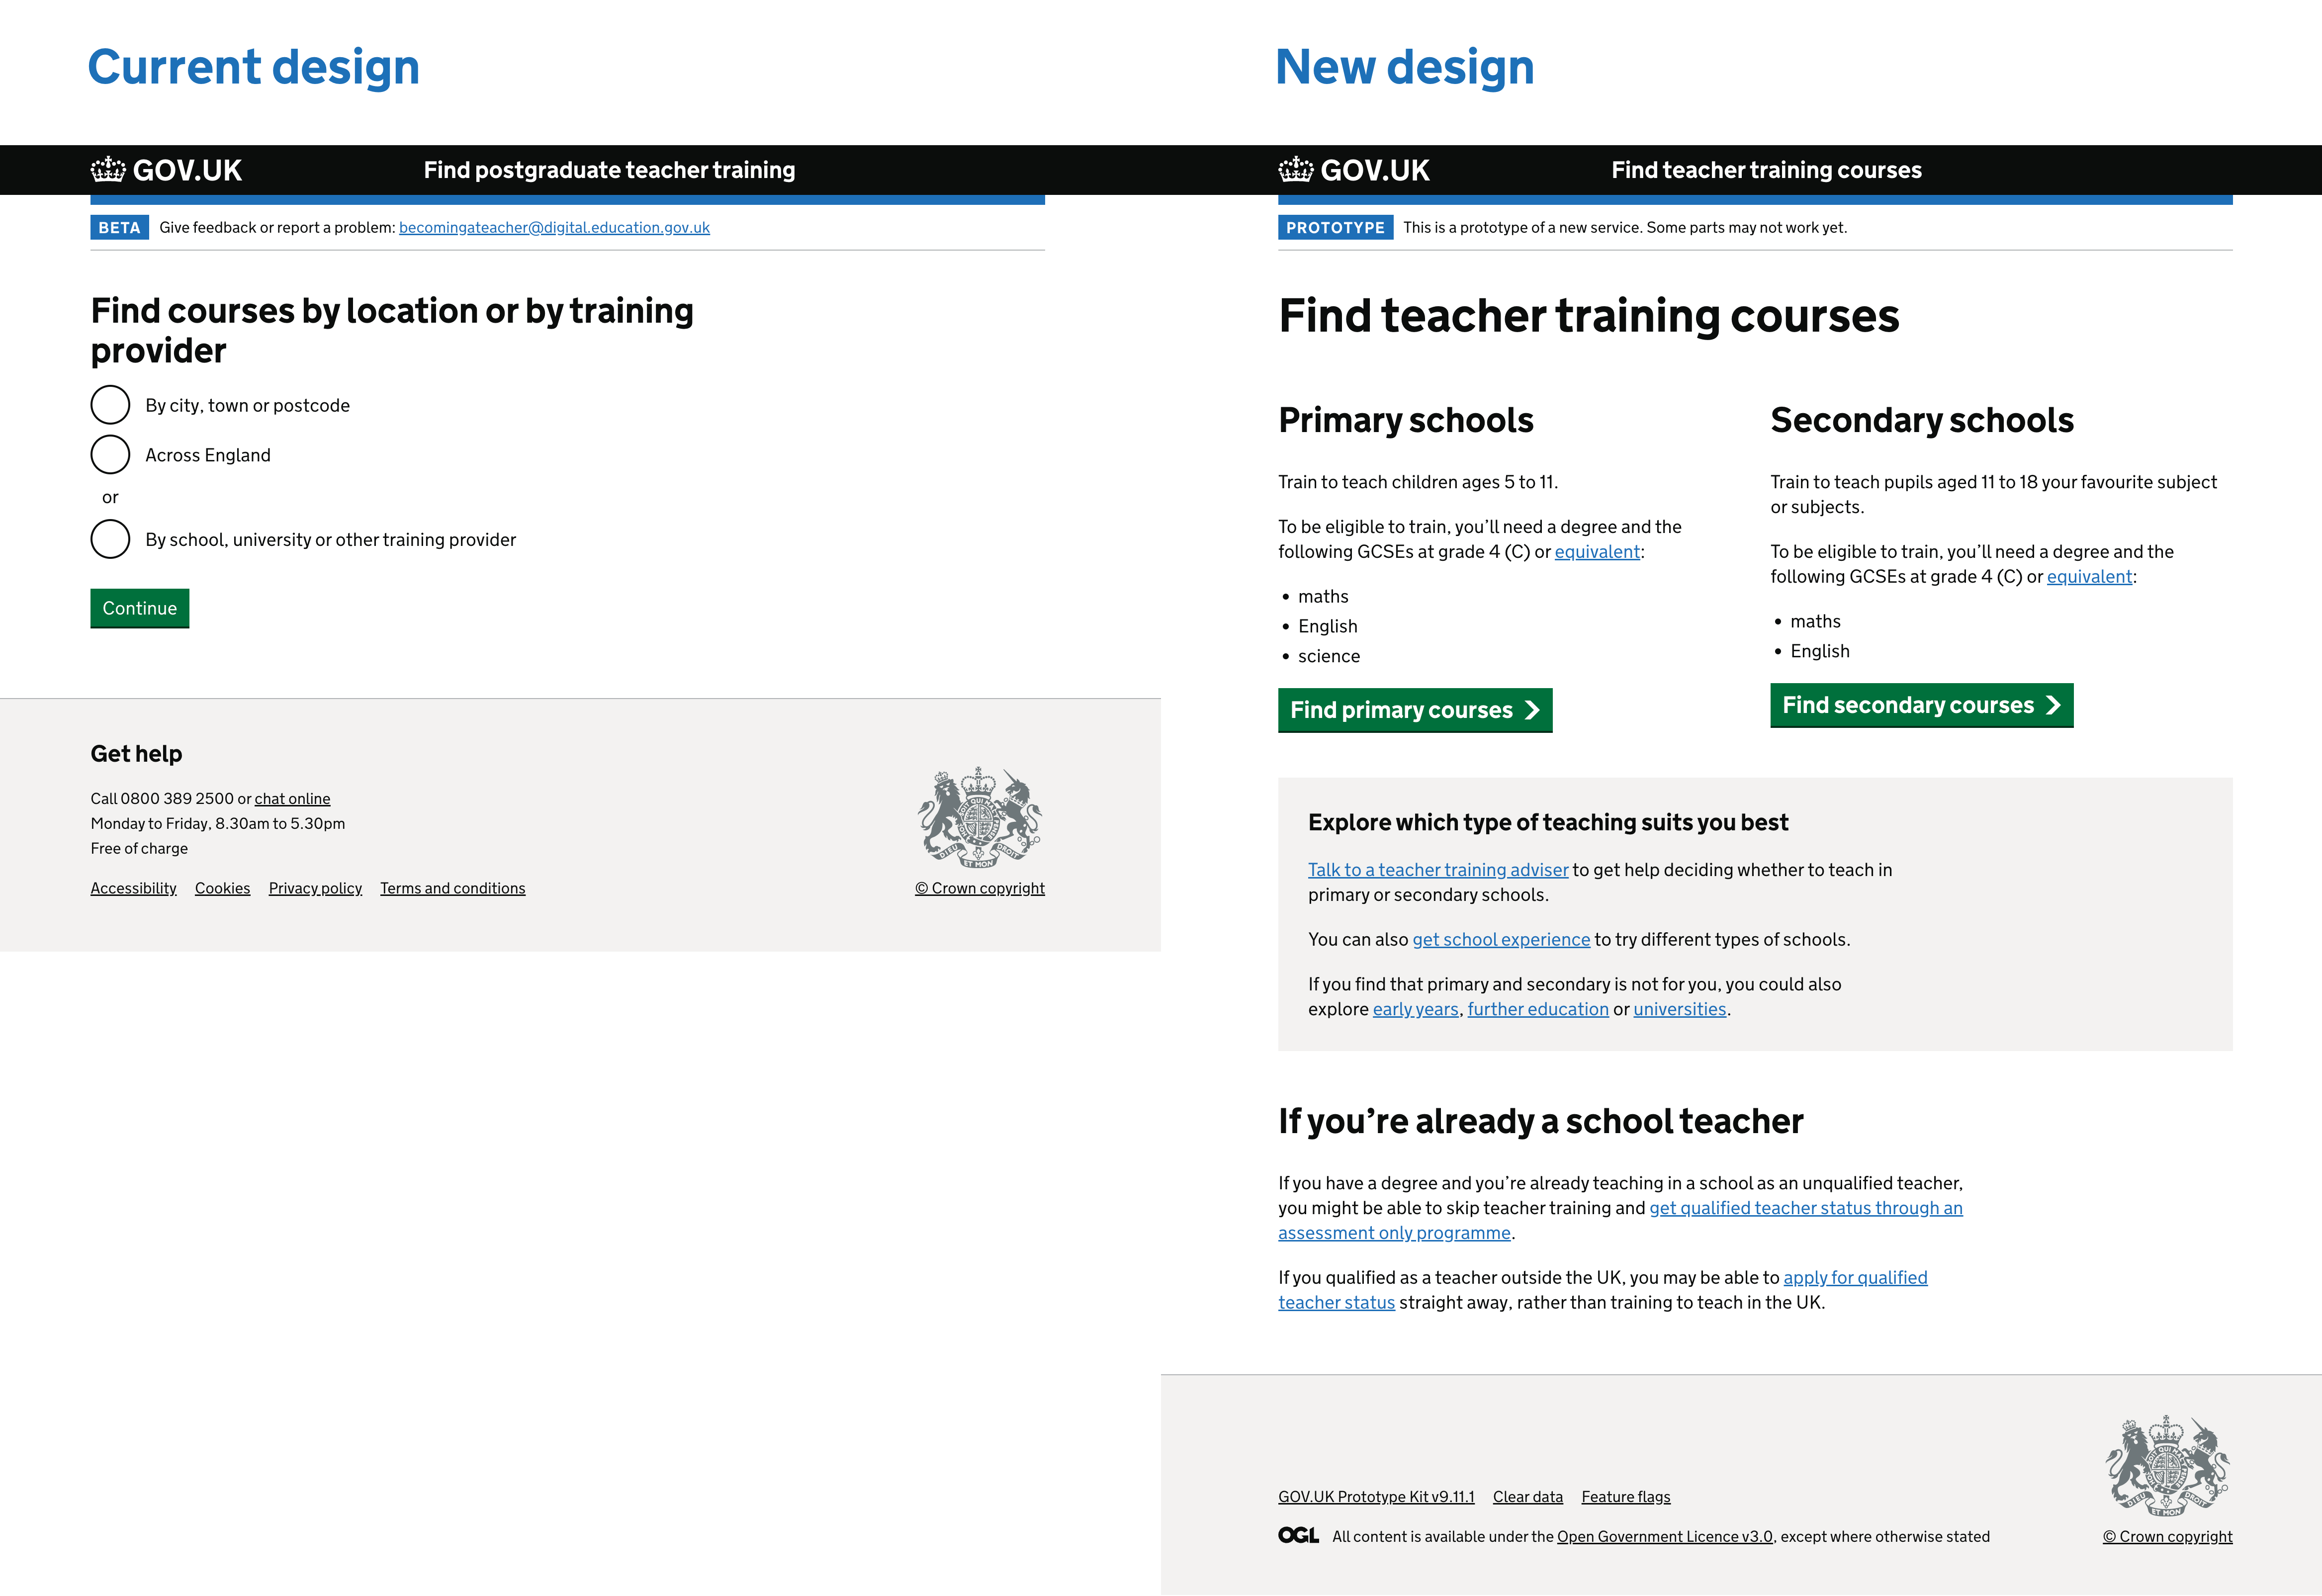 Screenshots showing old and new designs for the homepage, with the old design containing a 3 radio button options and the new design showing more content, two green buttons labelled 'Find primary courses' and 'Find secondary courses' and further links below